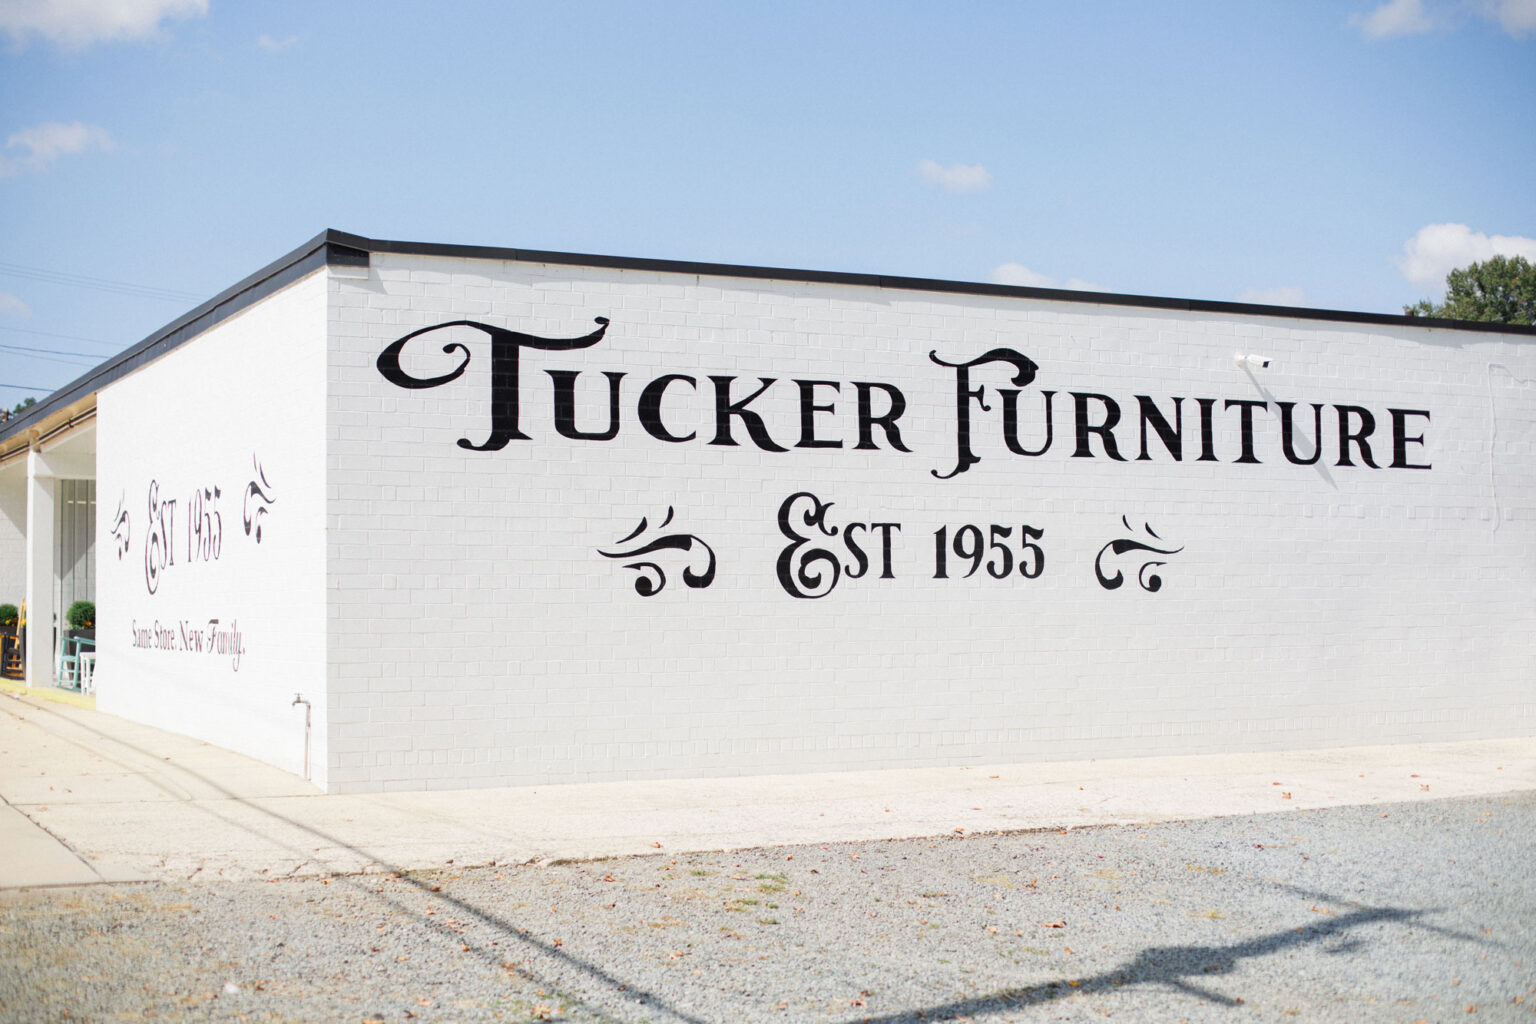 Tucker Furniture family-owned local furniture company established in 1955